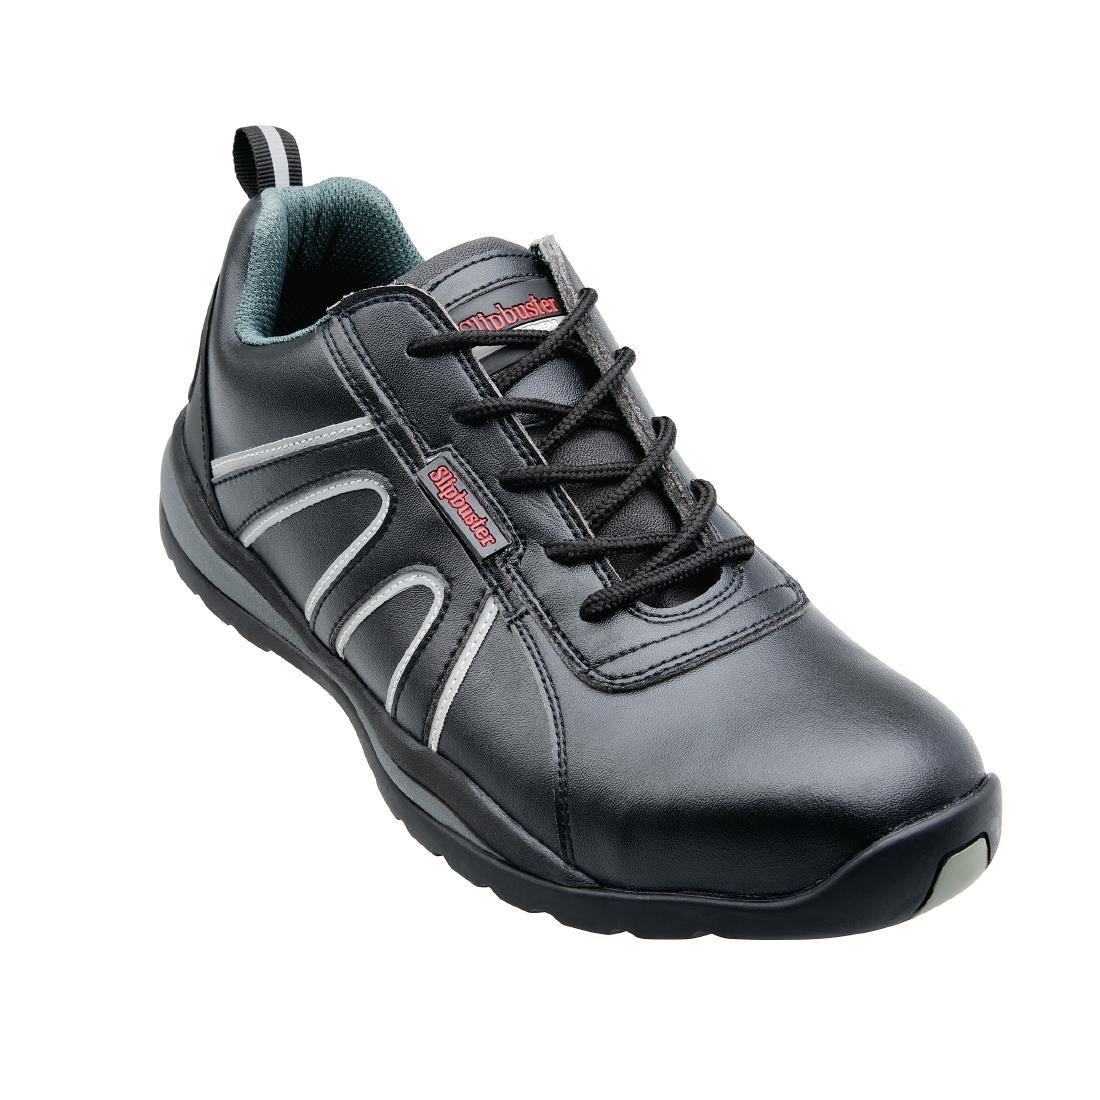 Slipbuster Safety Trainers Black 42 - A708-42  - 5